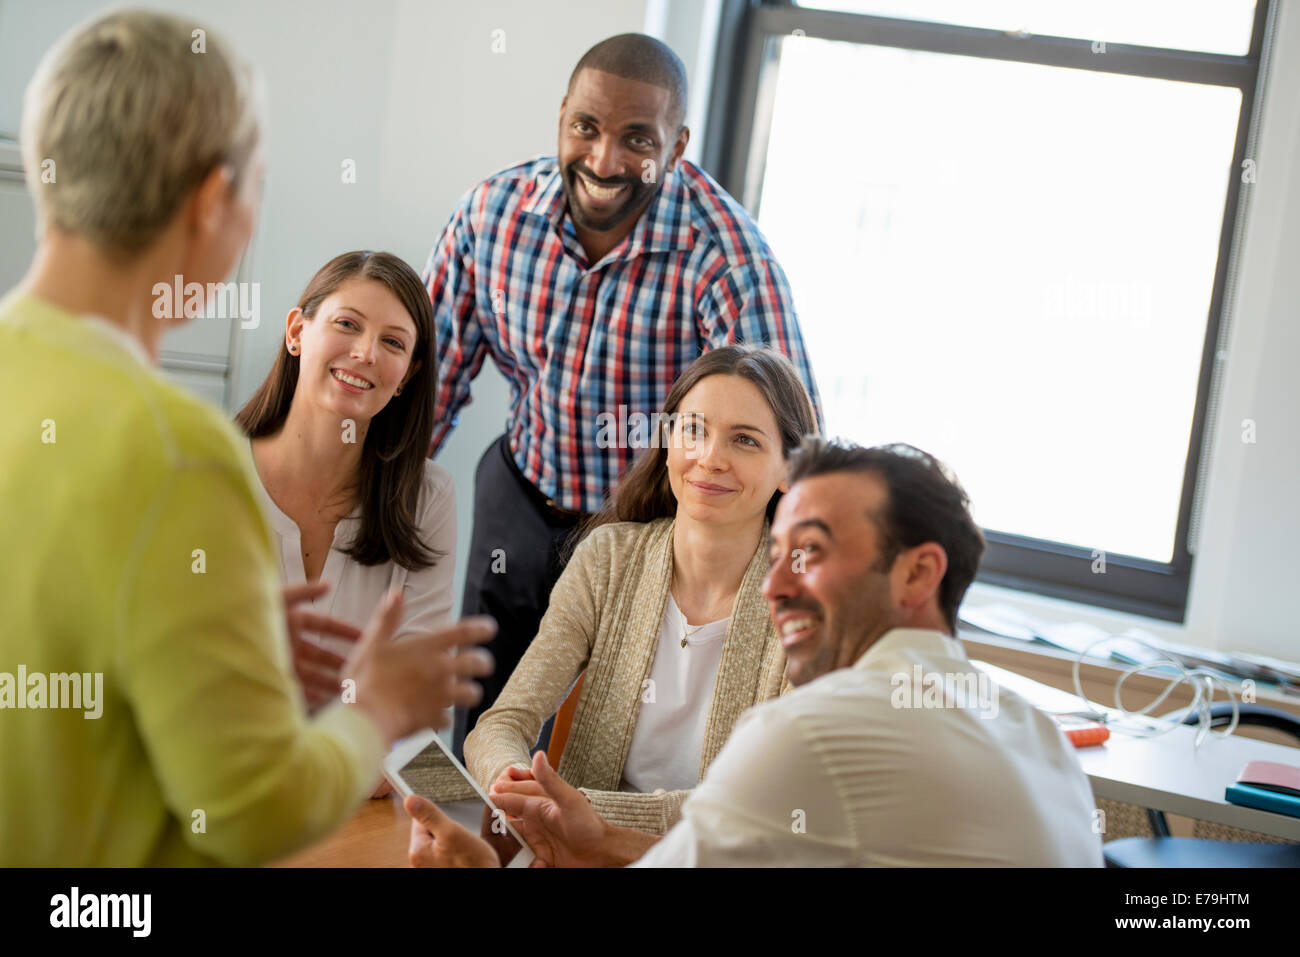 Five people in an office, two men and three women talking. Stock Photo